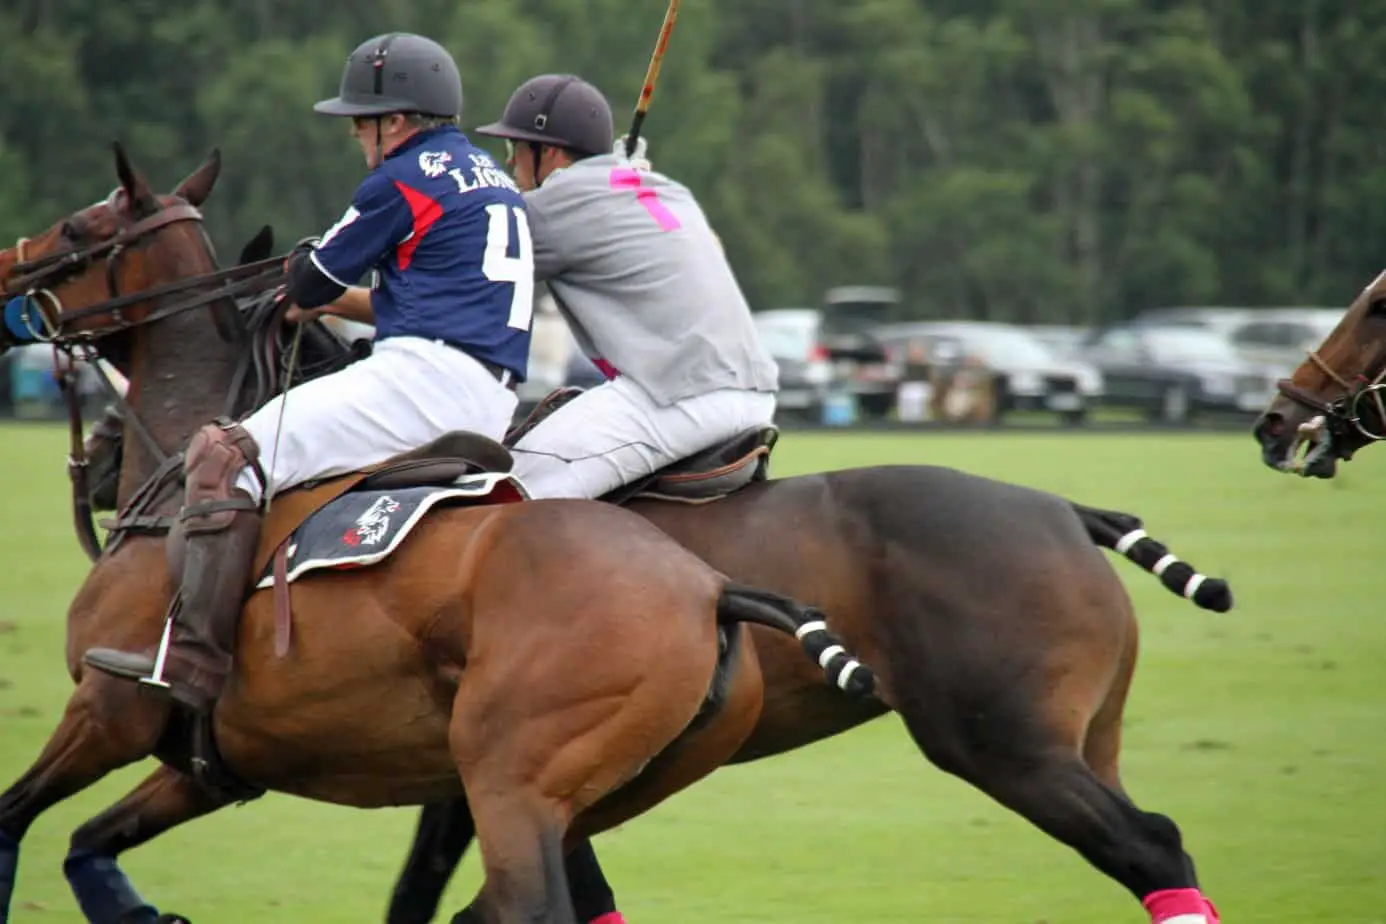 What Breed of Horse Is Used For Polo?